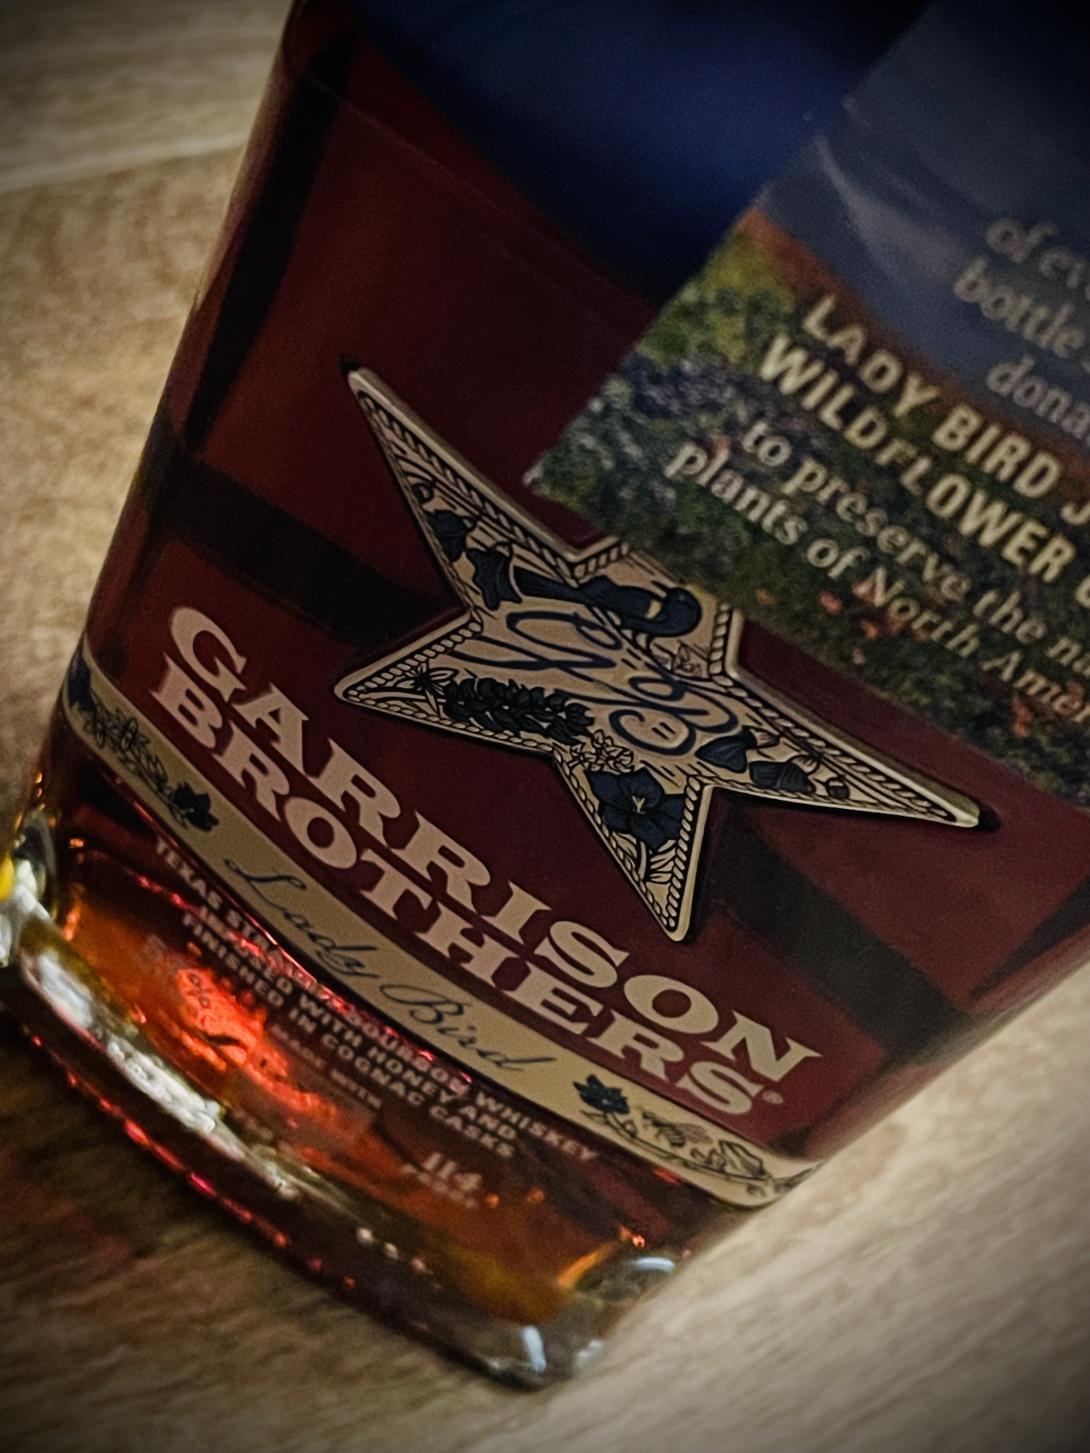 Garrison Brothers Lady Bird: A Must Try for Bourbon Afficiandos 